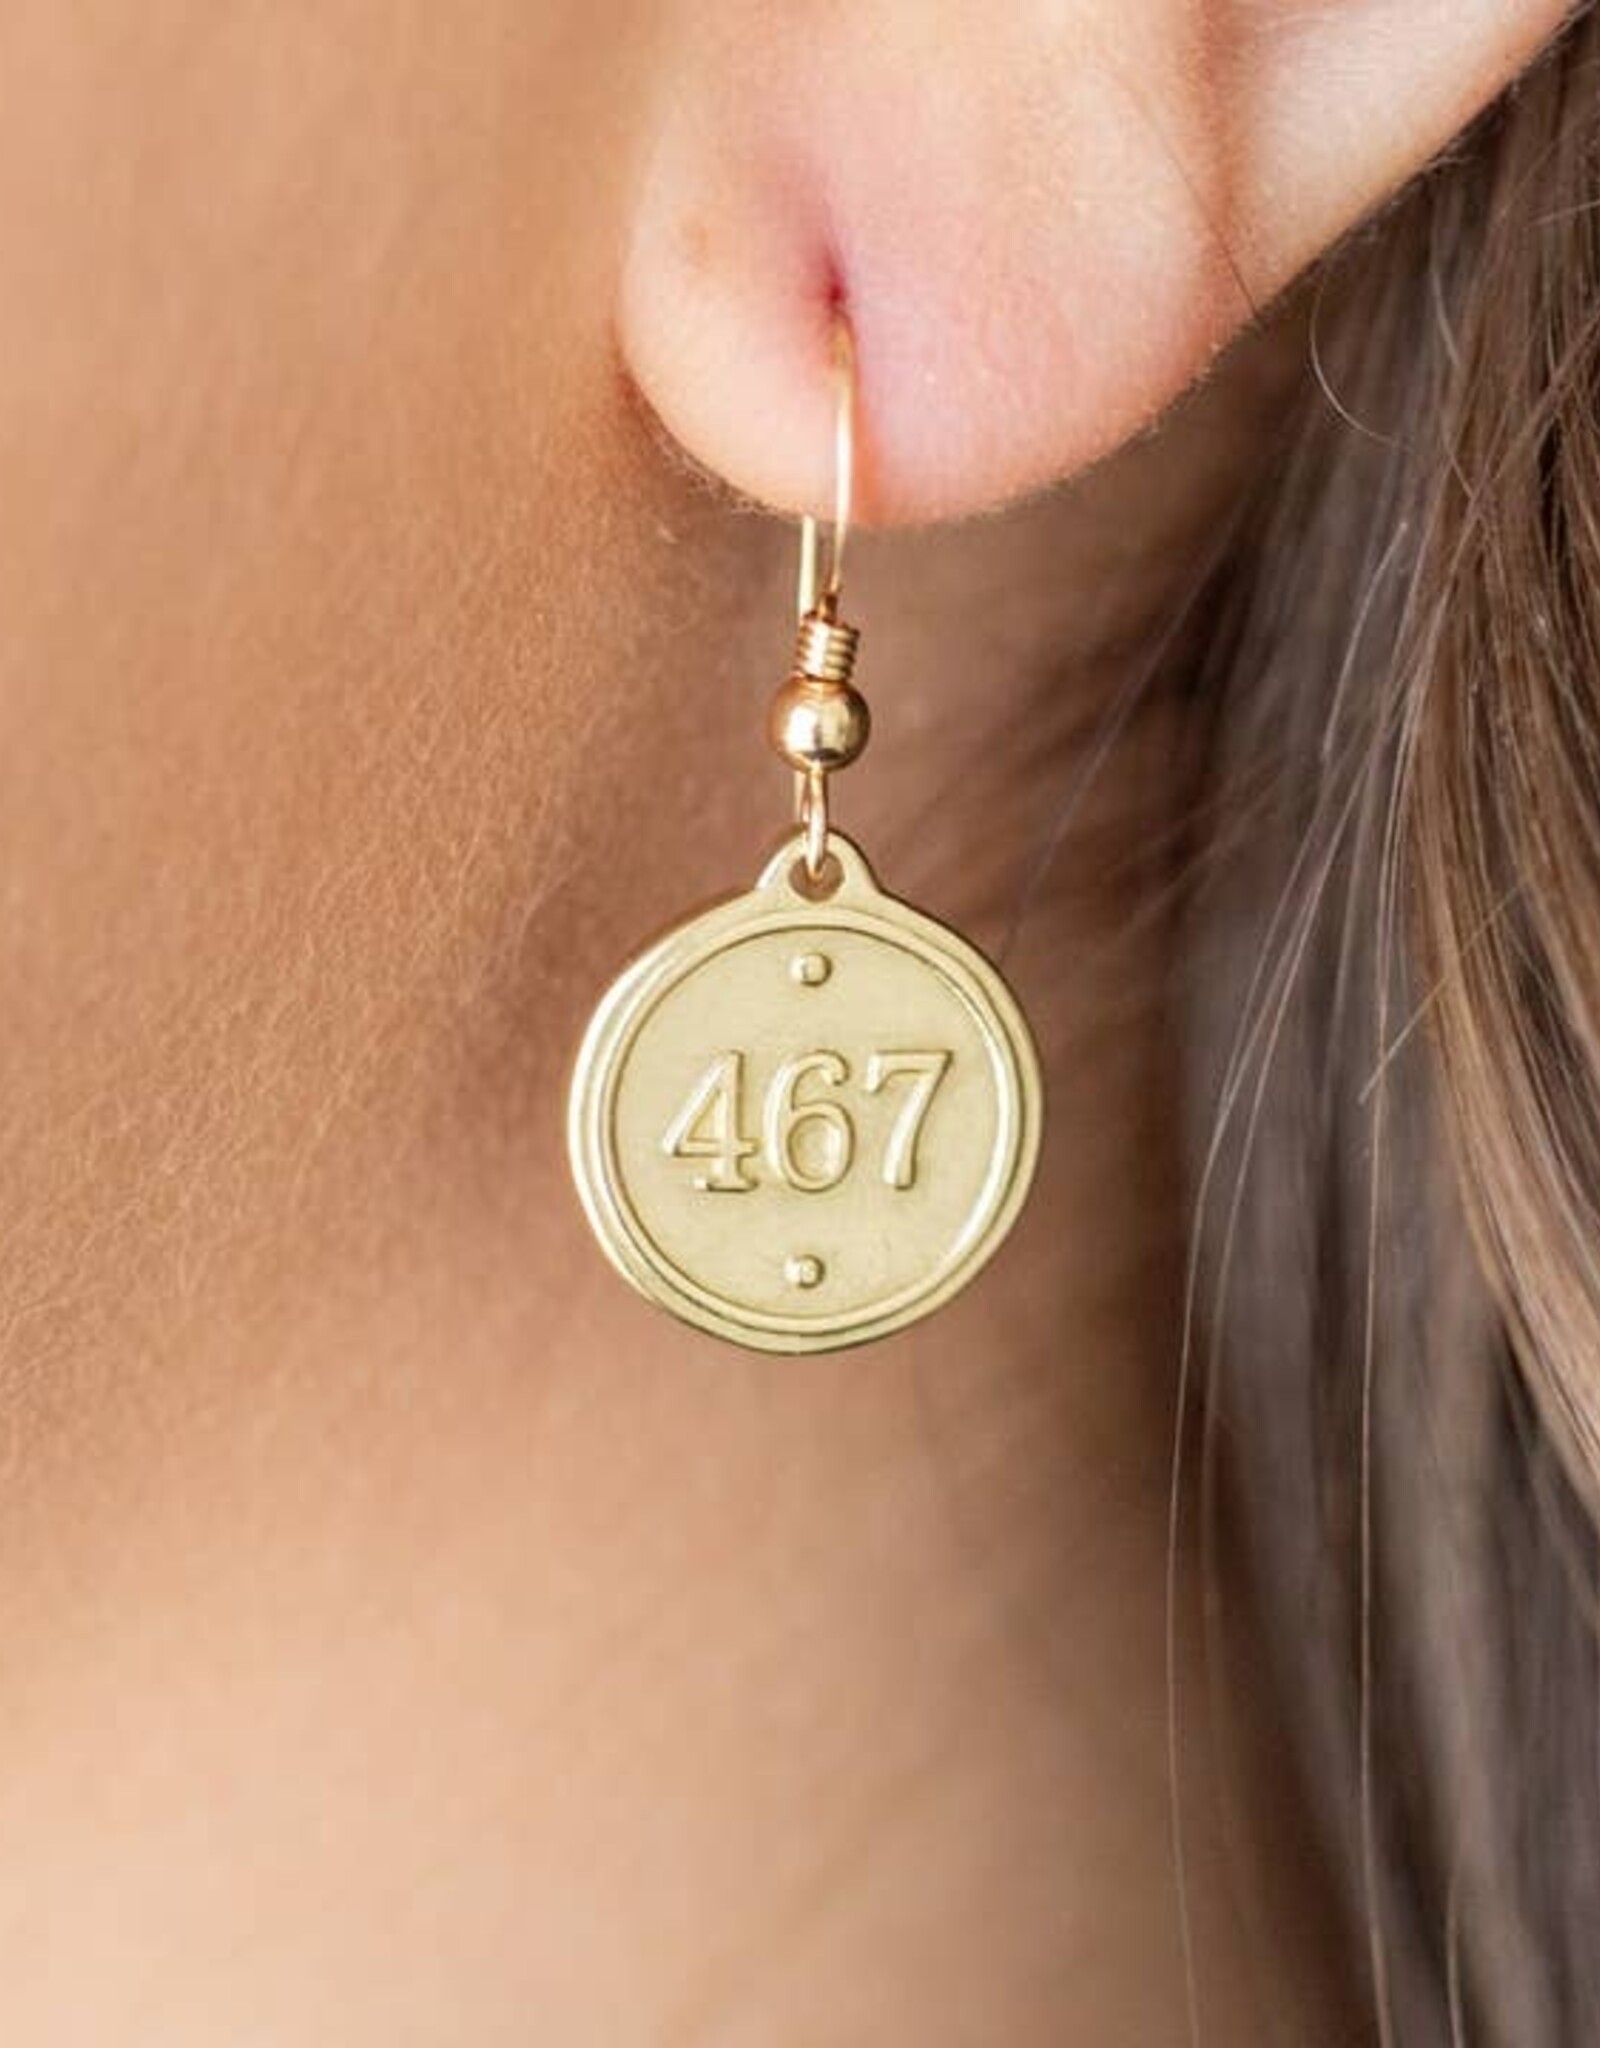 Madison Sterling French Hook Earring- Philippians 4:6-7